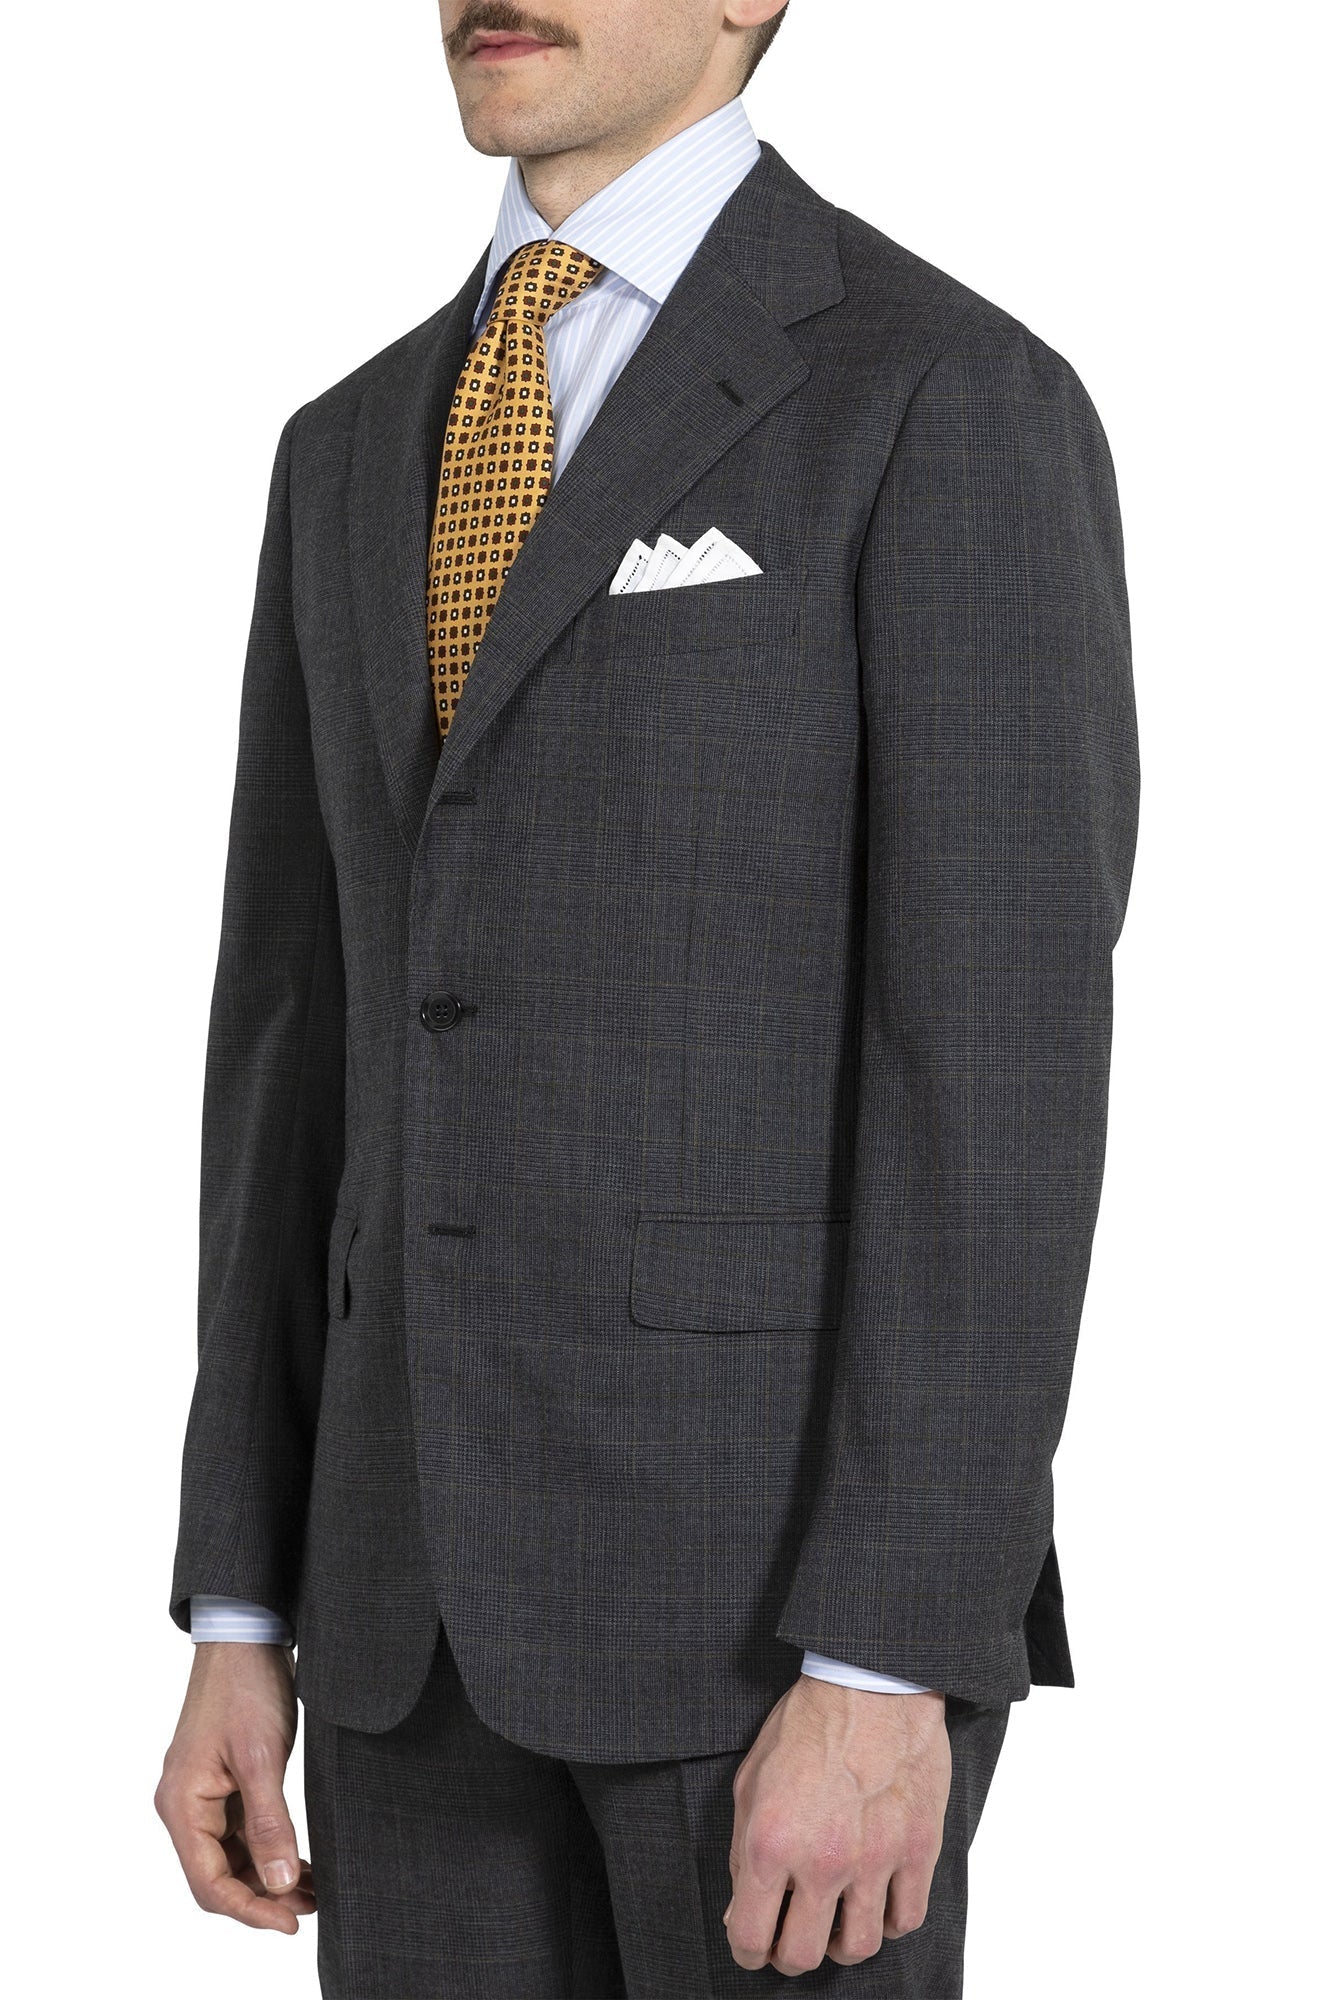 The Armoury by Ring Jacket Model 3A Charcoal/Olive Wool Glen Plaid Suit